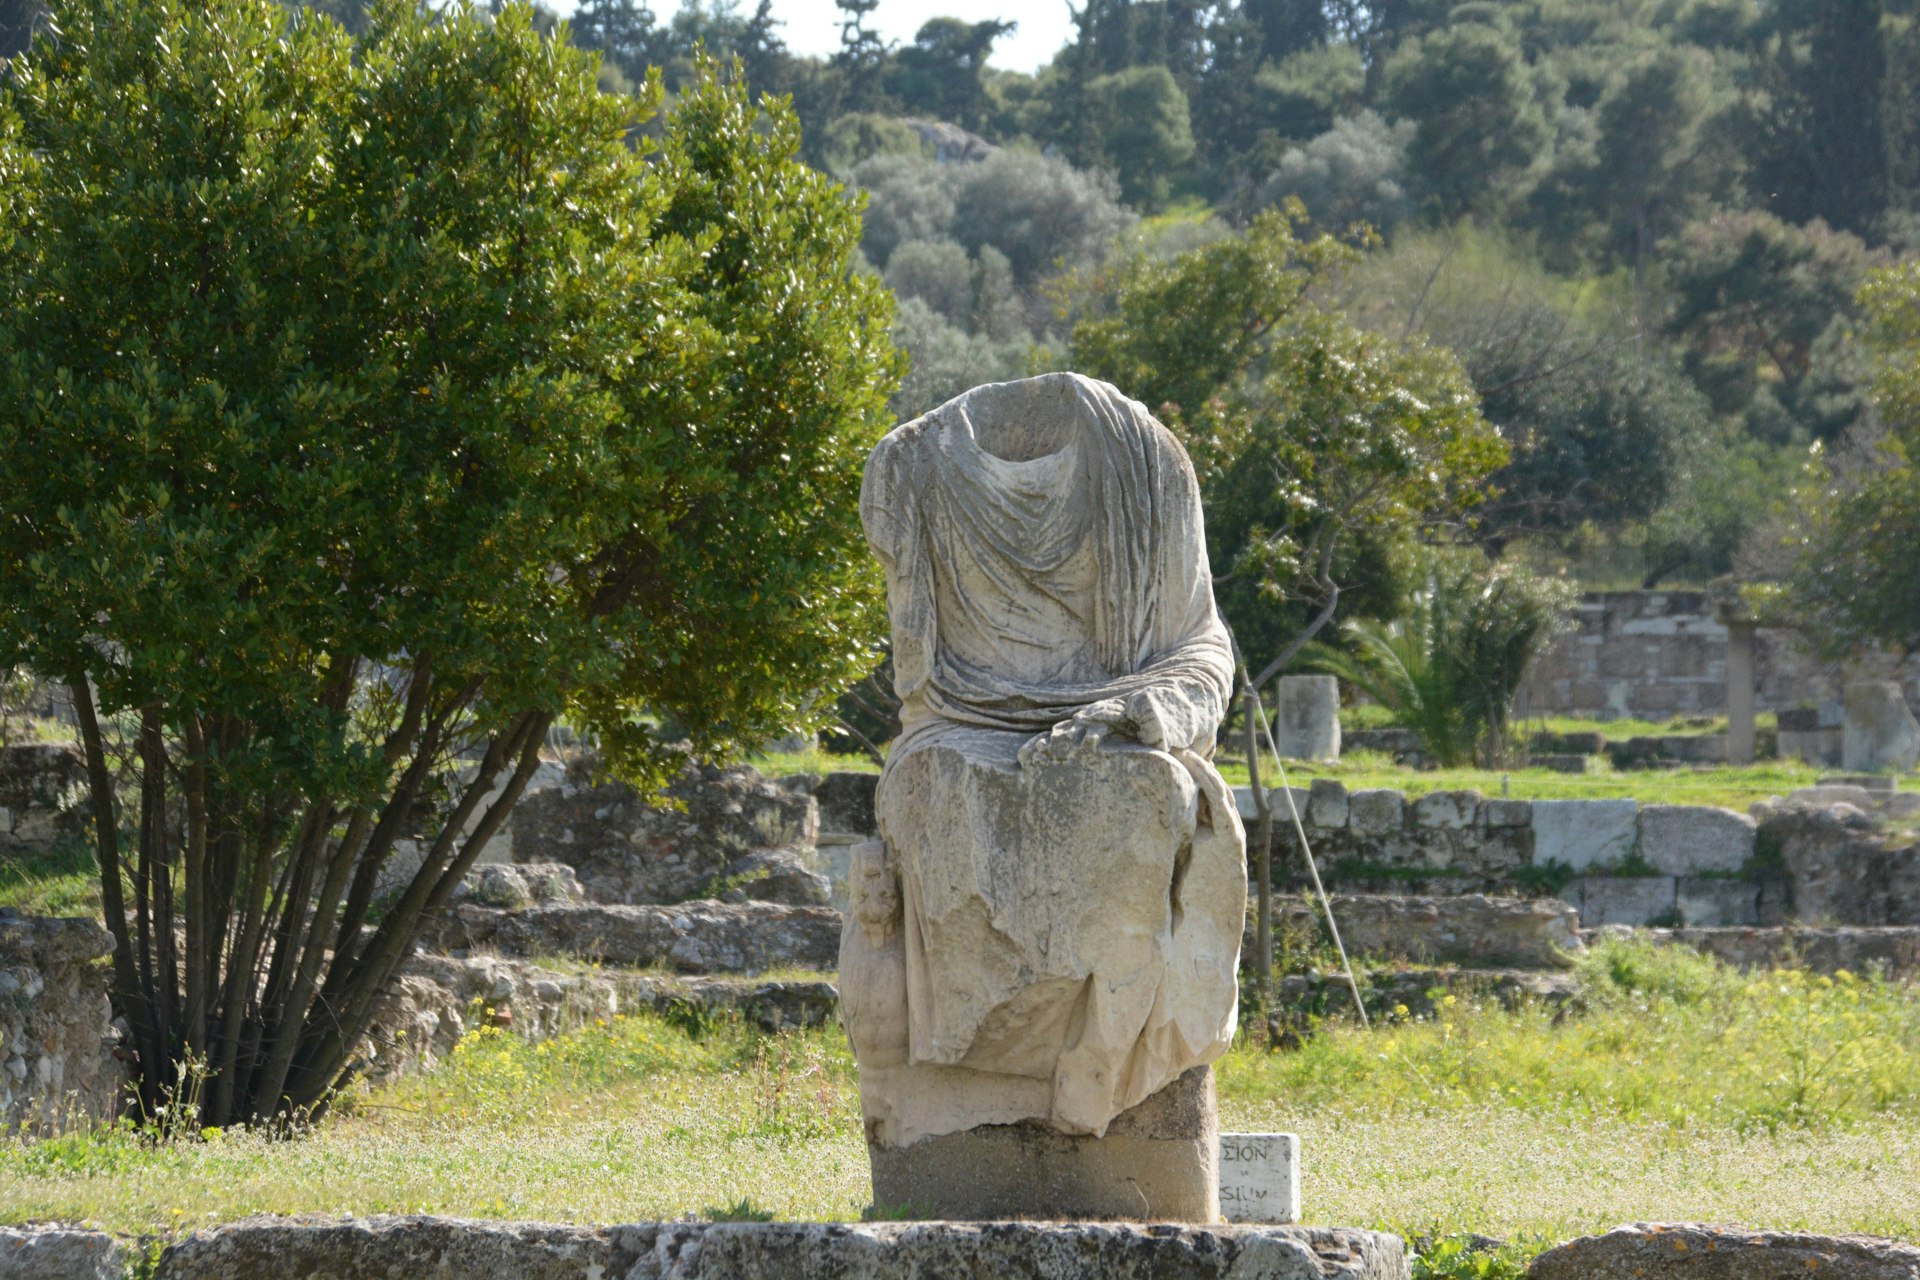 A headless Greek statue on display at the Ancient Agora archaeological site in Athens, Greece with olive trees in the background